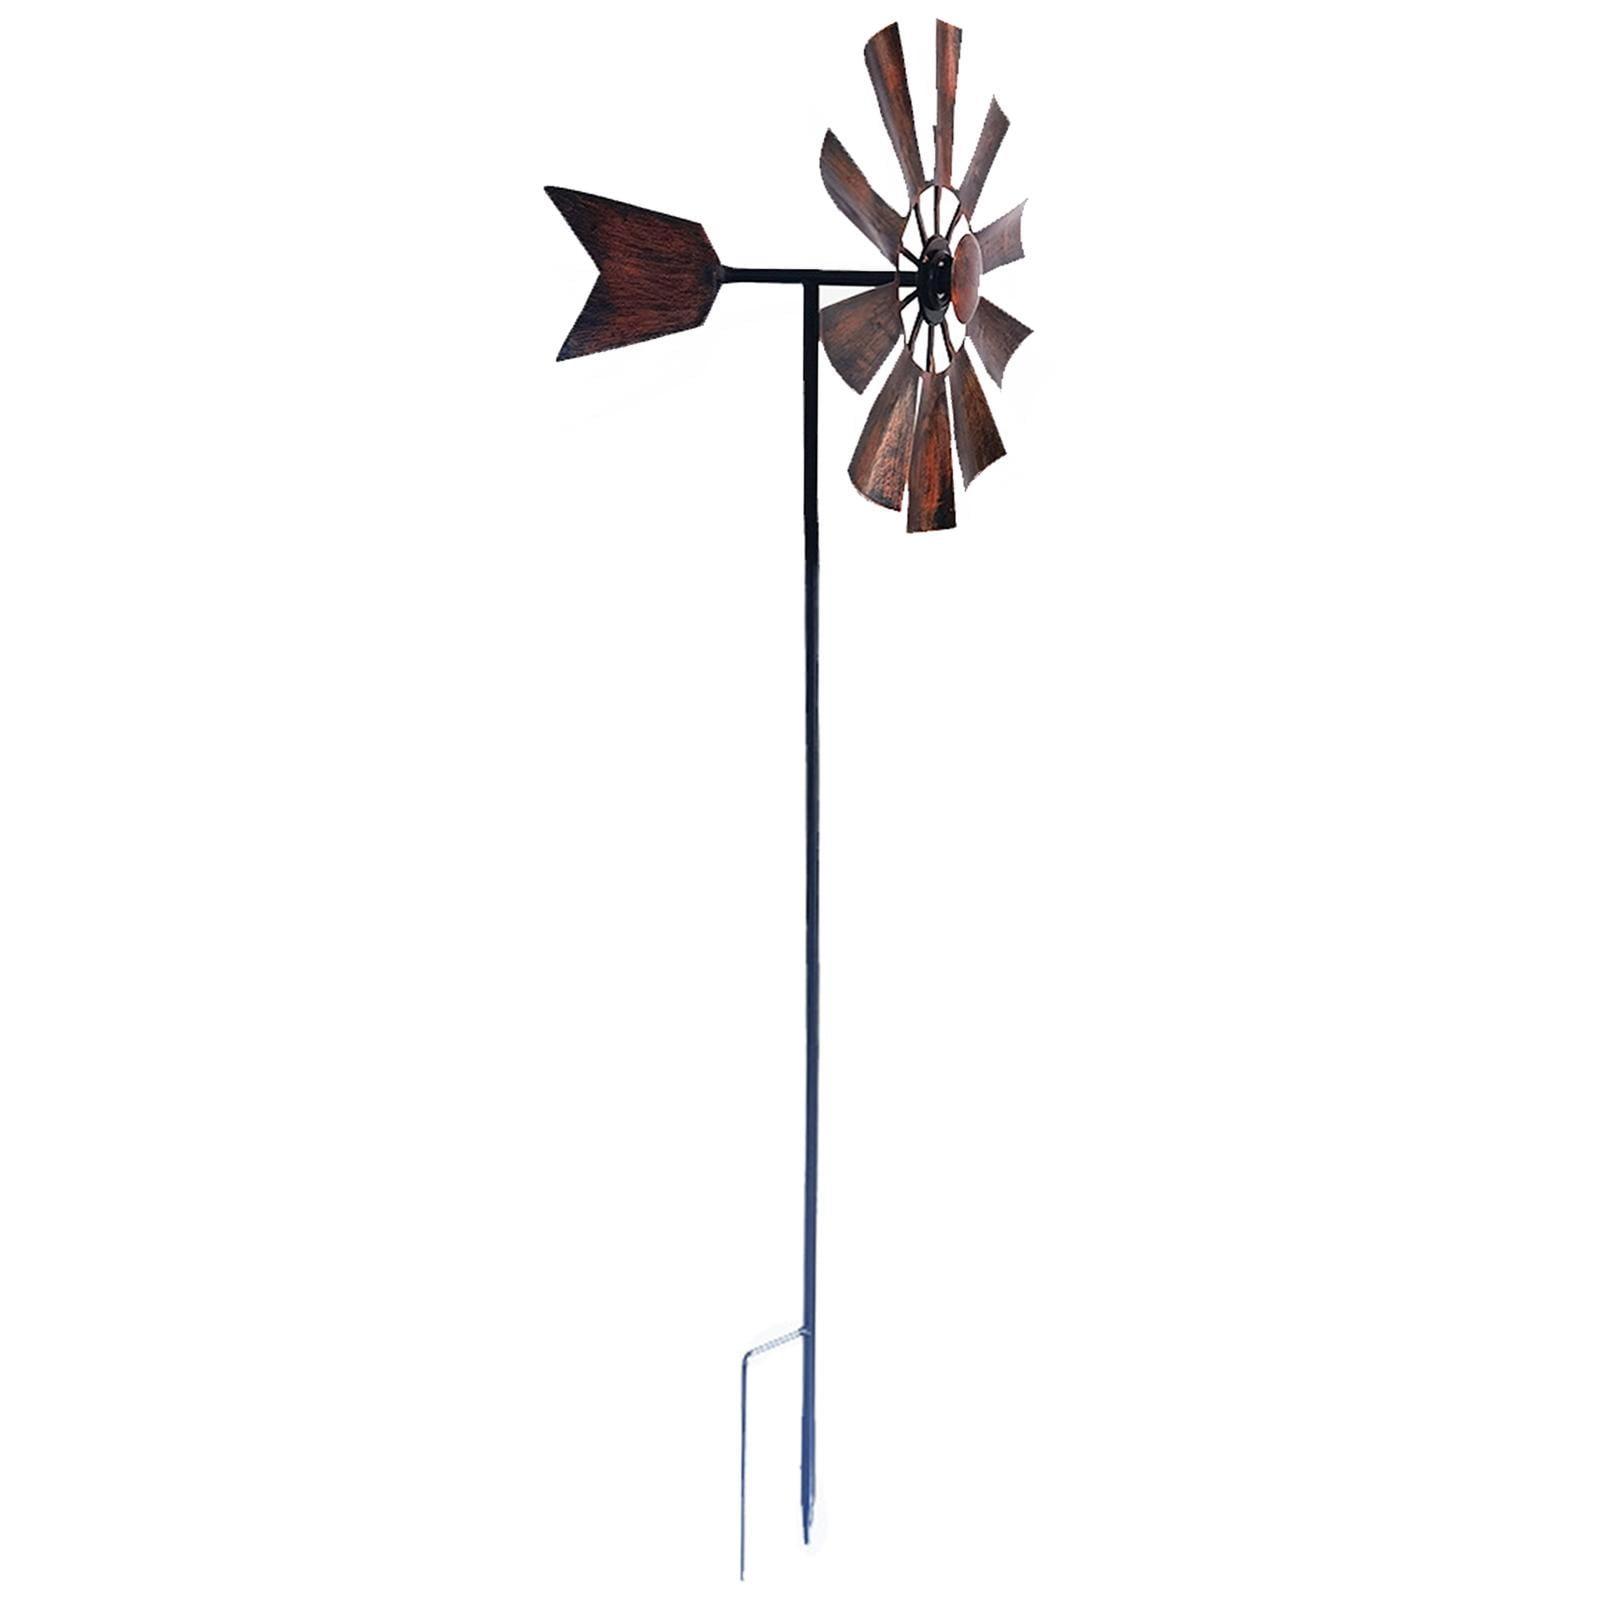 Doukedge Wind Spinner Garden Pinwheels Outdoor Decor Pinwheels Windmills Whirligigs with Stakes Lovely Fish Toys for Garden Yard Lawn Patio Party Wedding Decorations 